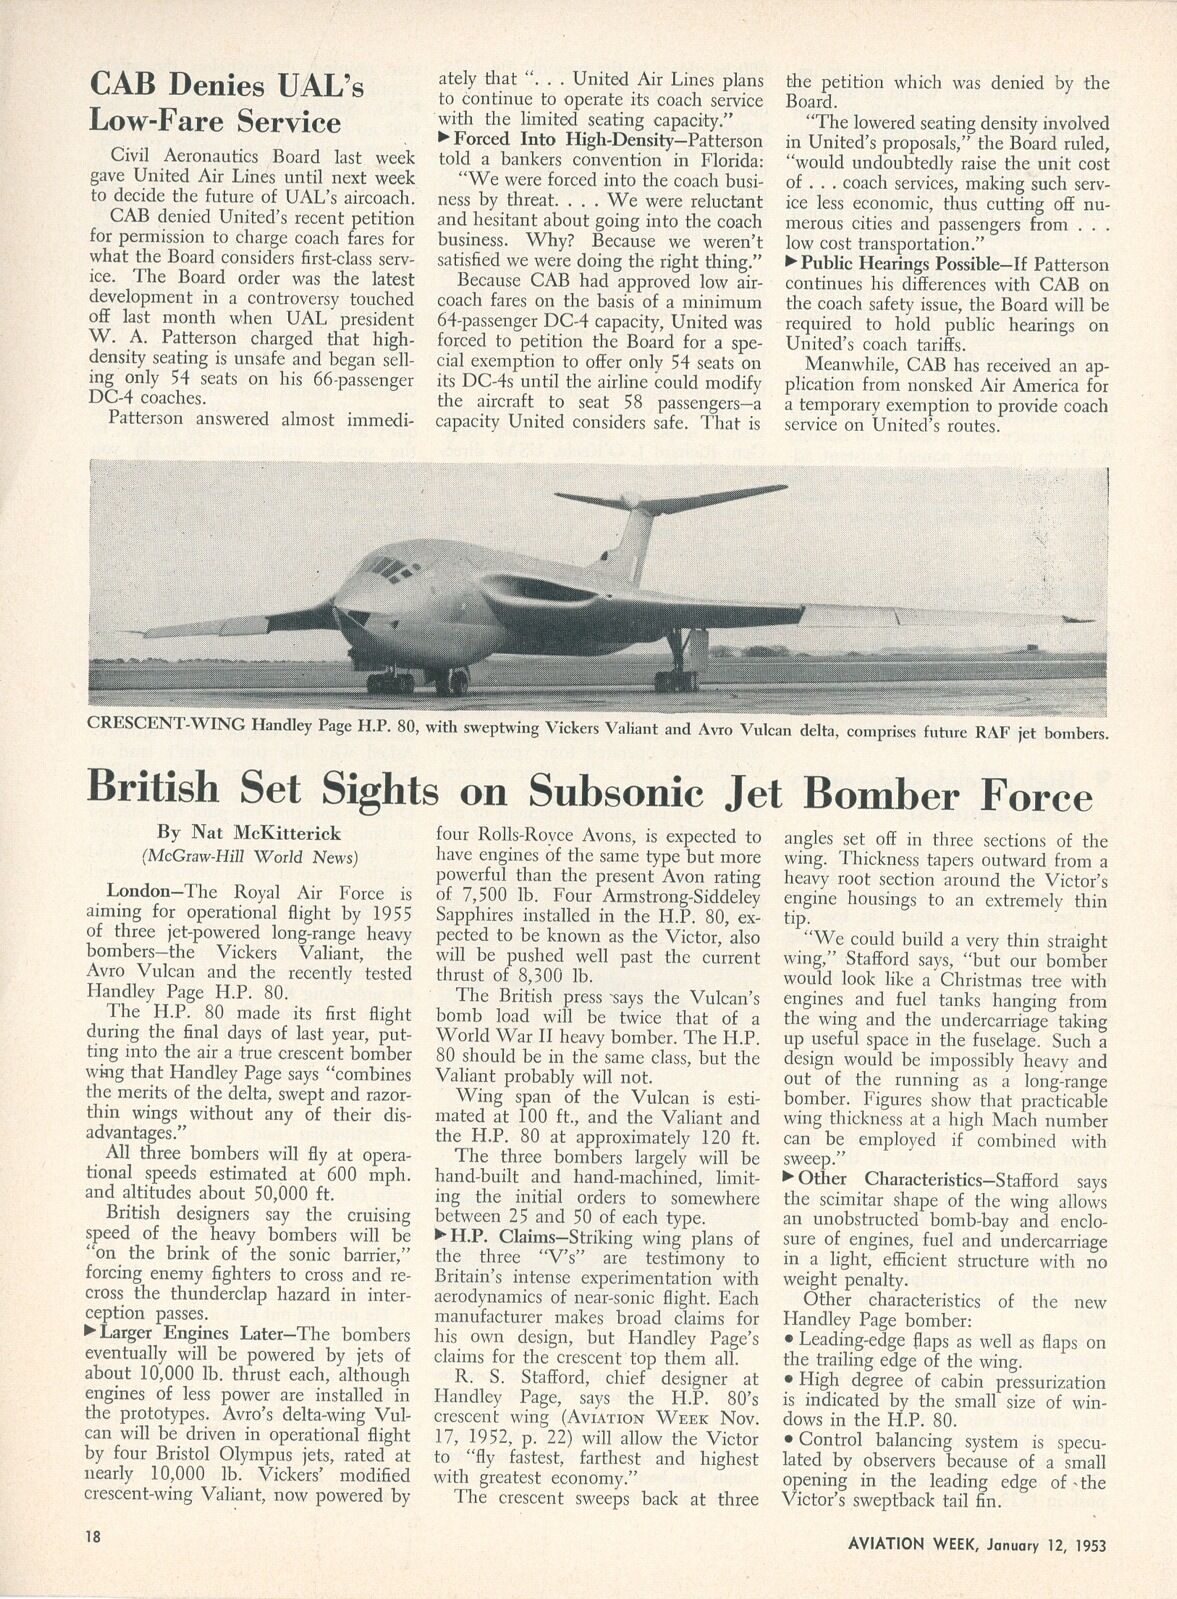 1953 Aviation Article Royal Air Force using Handley Page H.P. 80 Subsonic Bomber